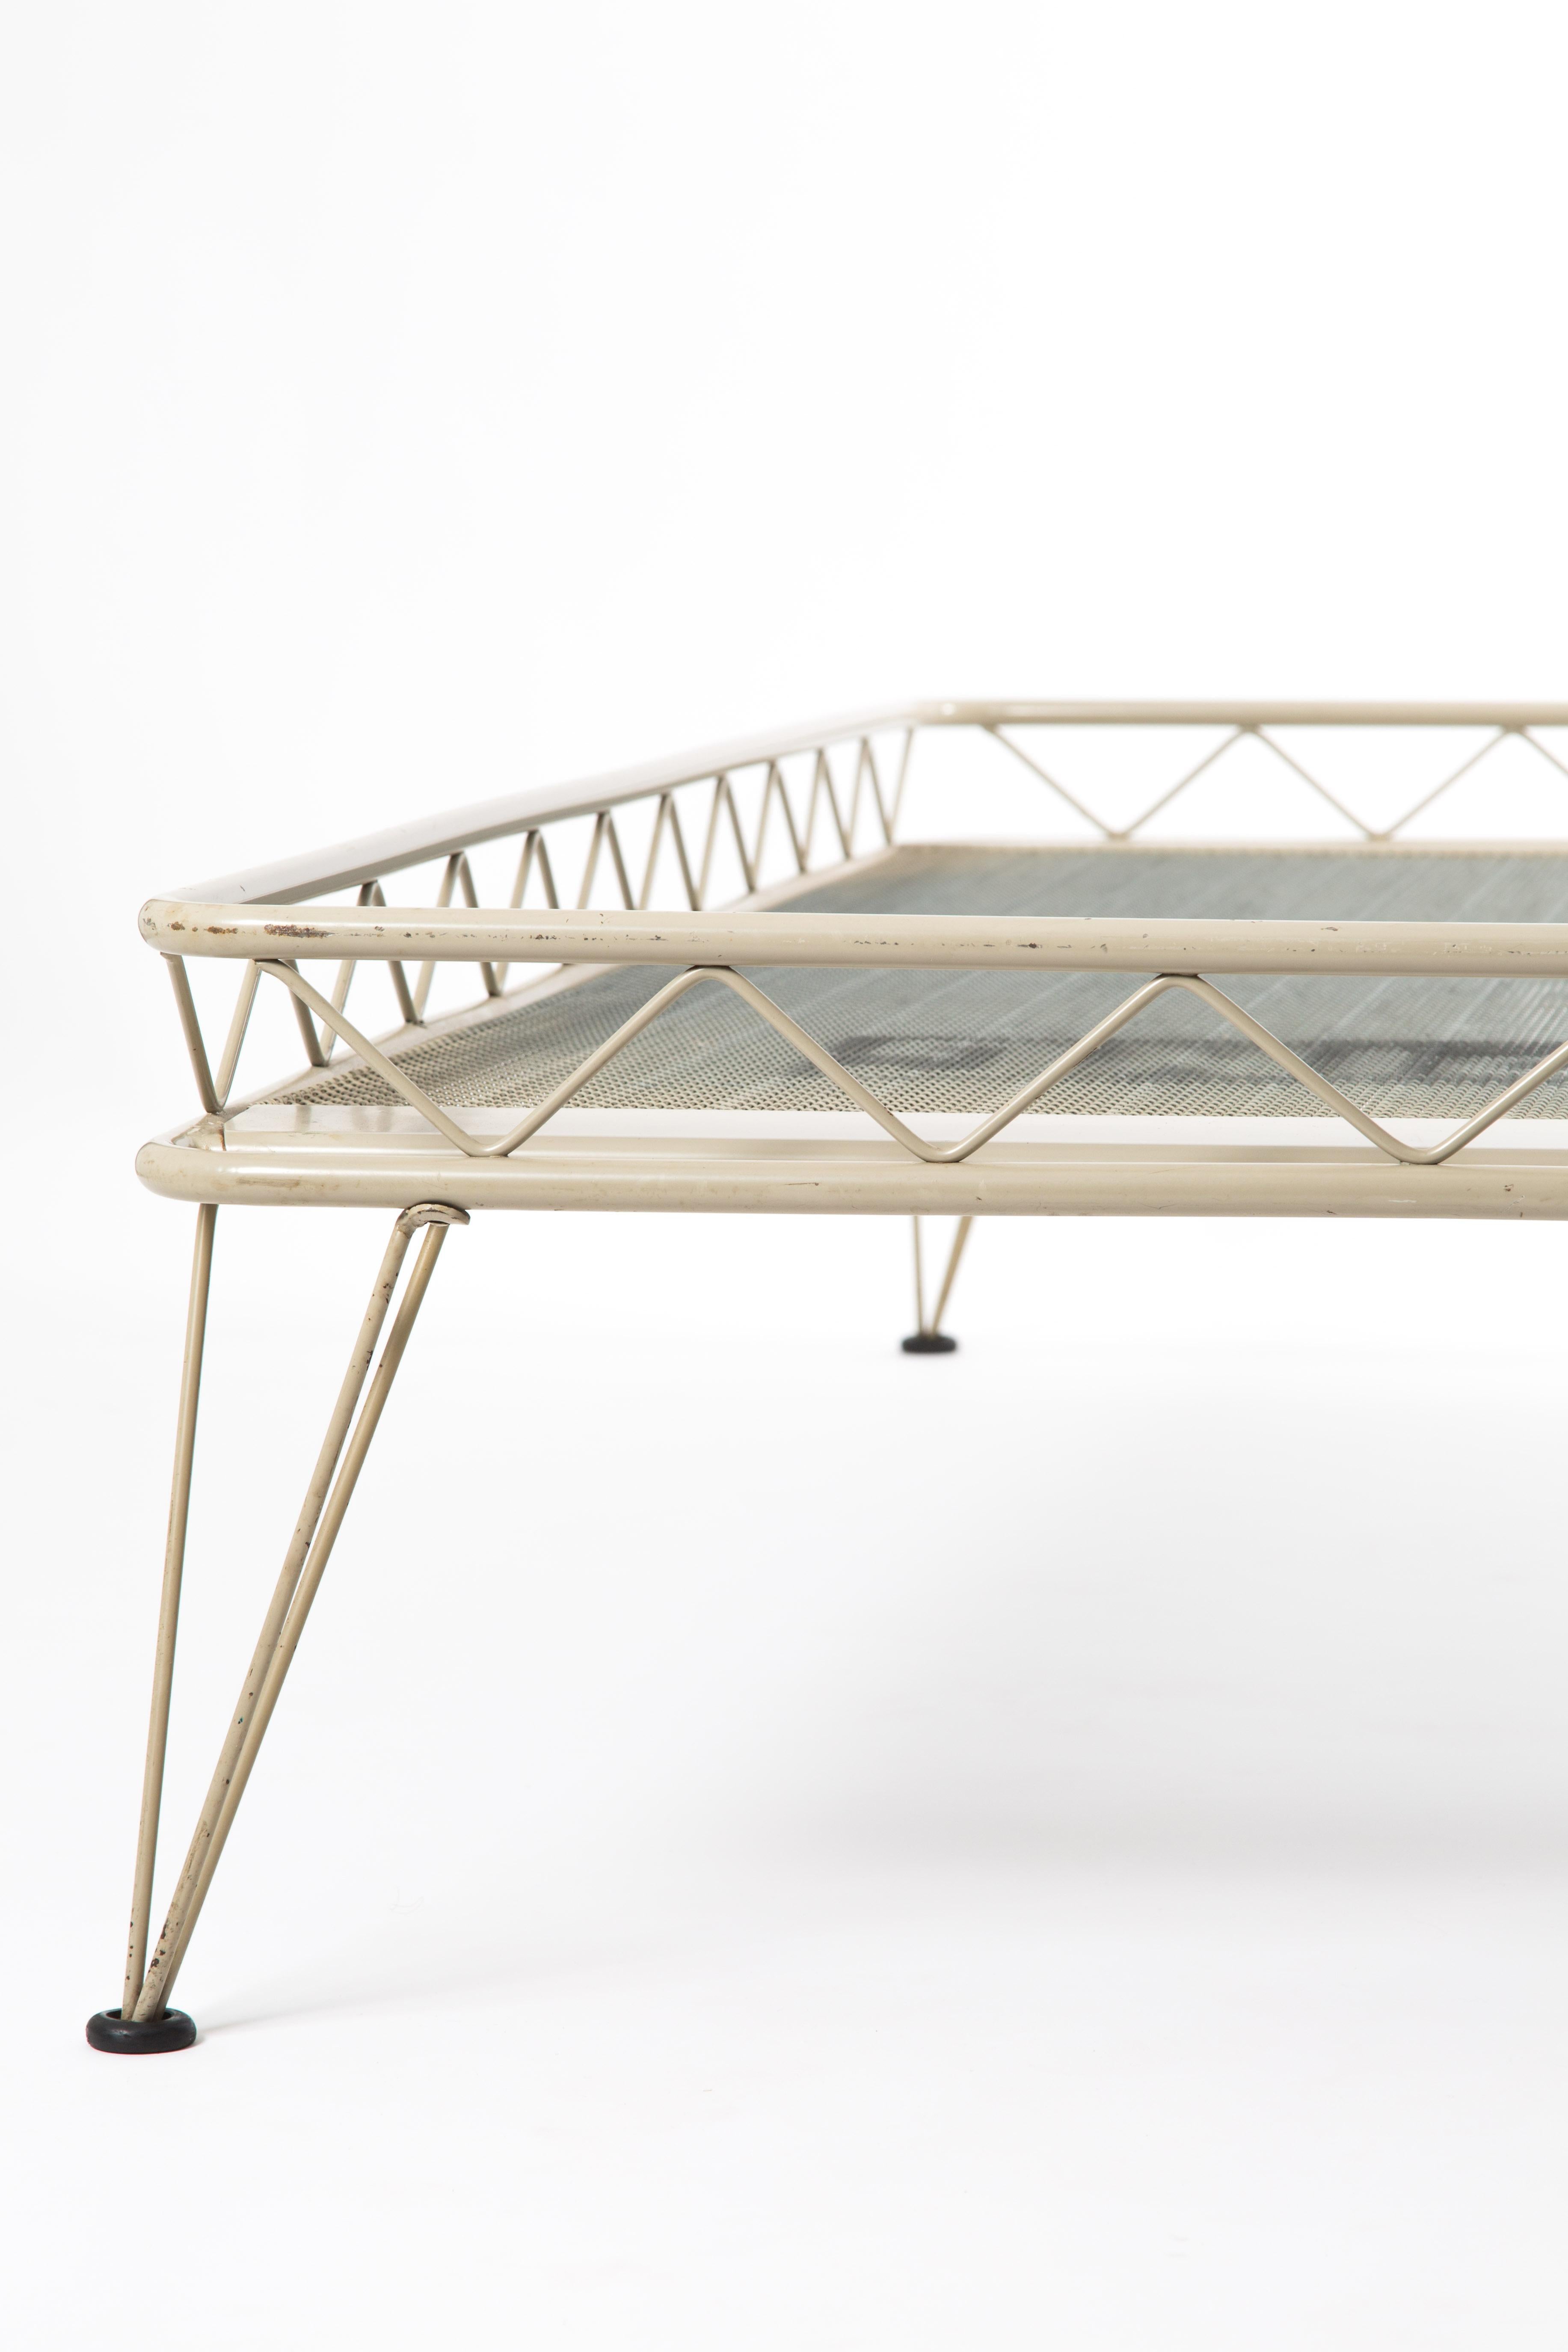 Auping Arielle Bed Daybed Wim Rietveld Dutch Industrial Design 9